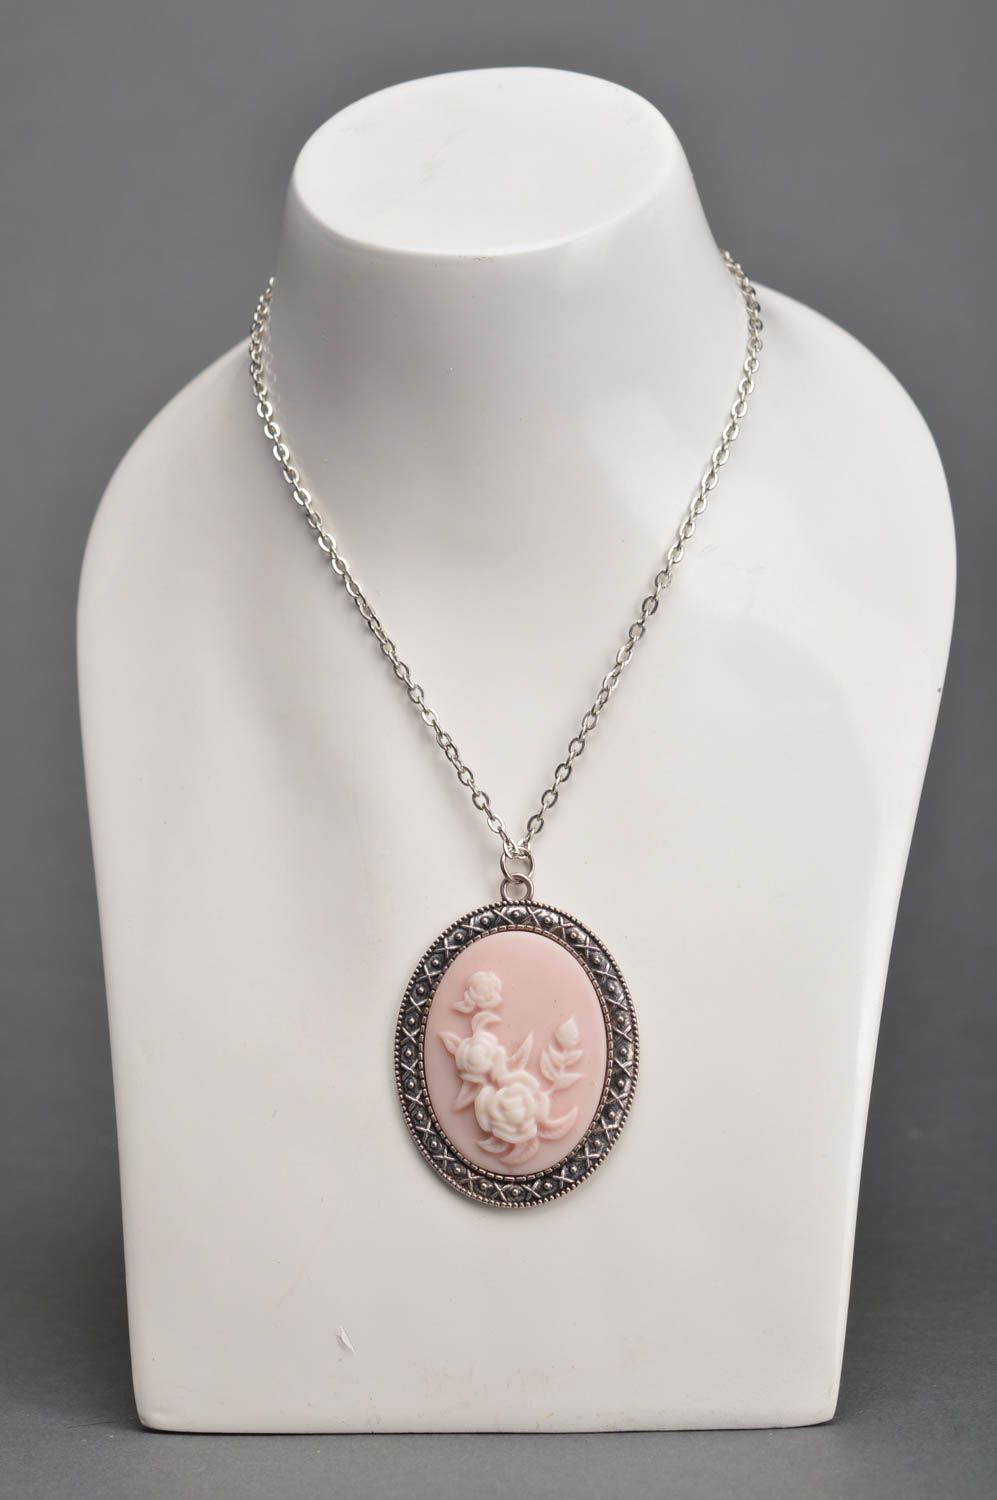 Pendant on long chain with oval cameo with roses beautiful handmade jewelry photo 1